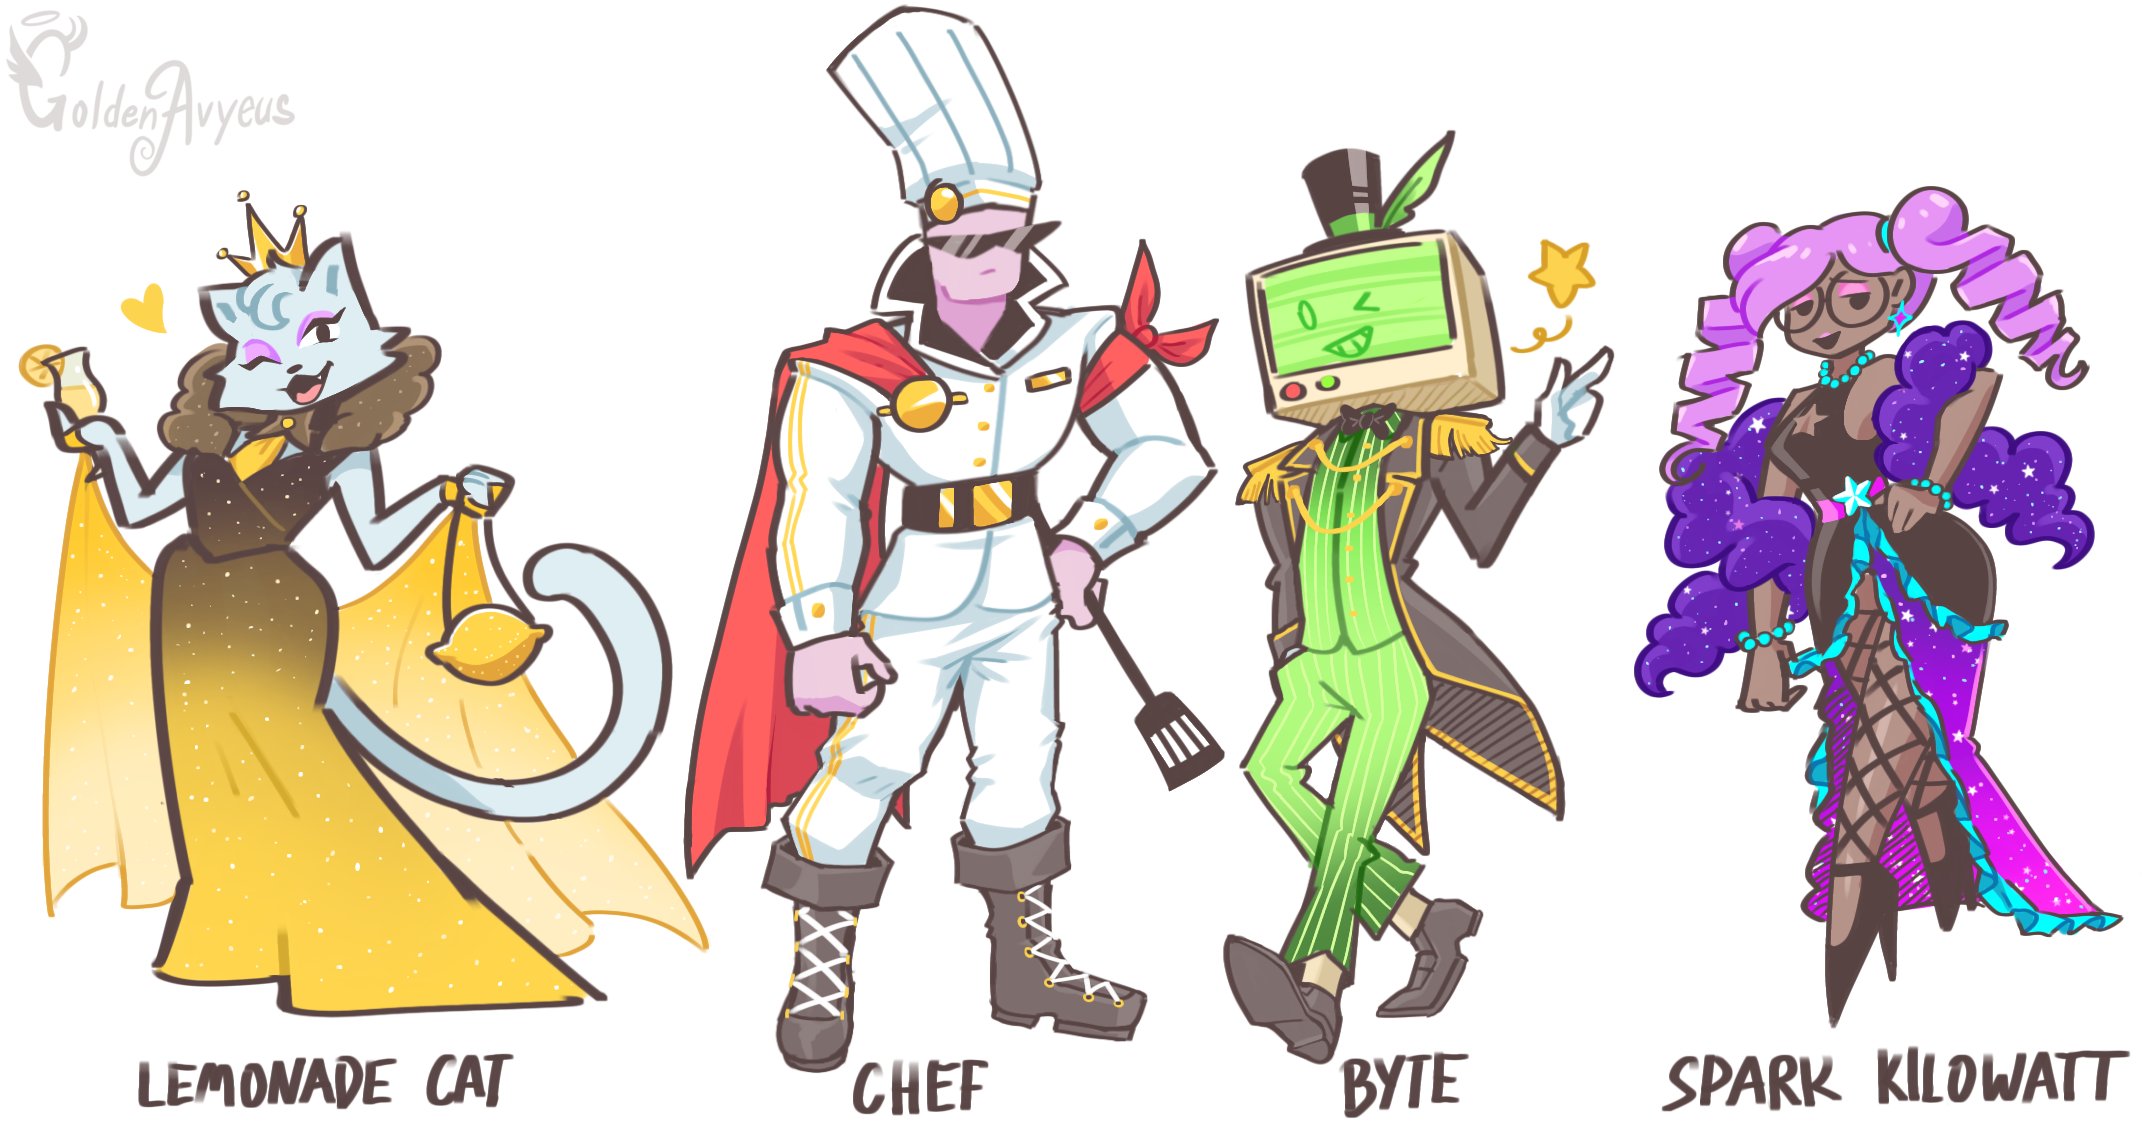 Roblox Tower Heroes byte phase 1 by messtalesans on DeviantArt